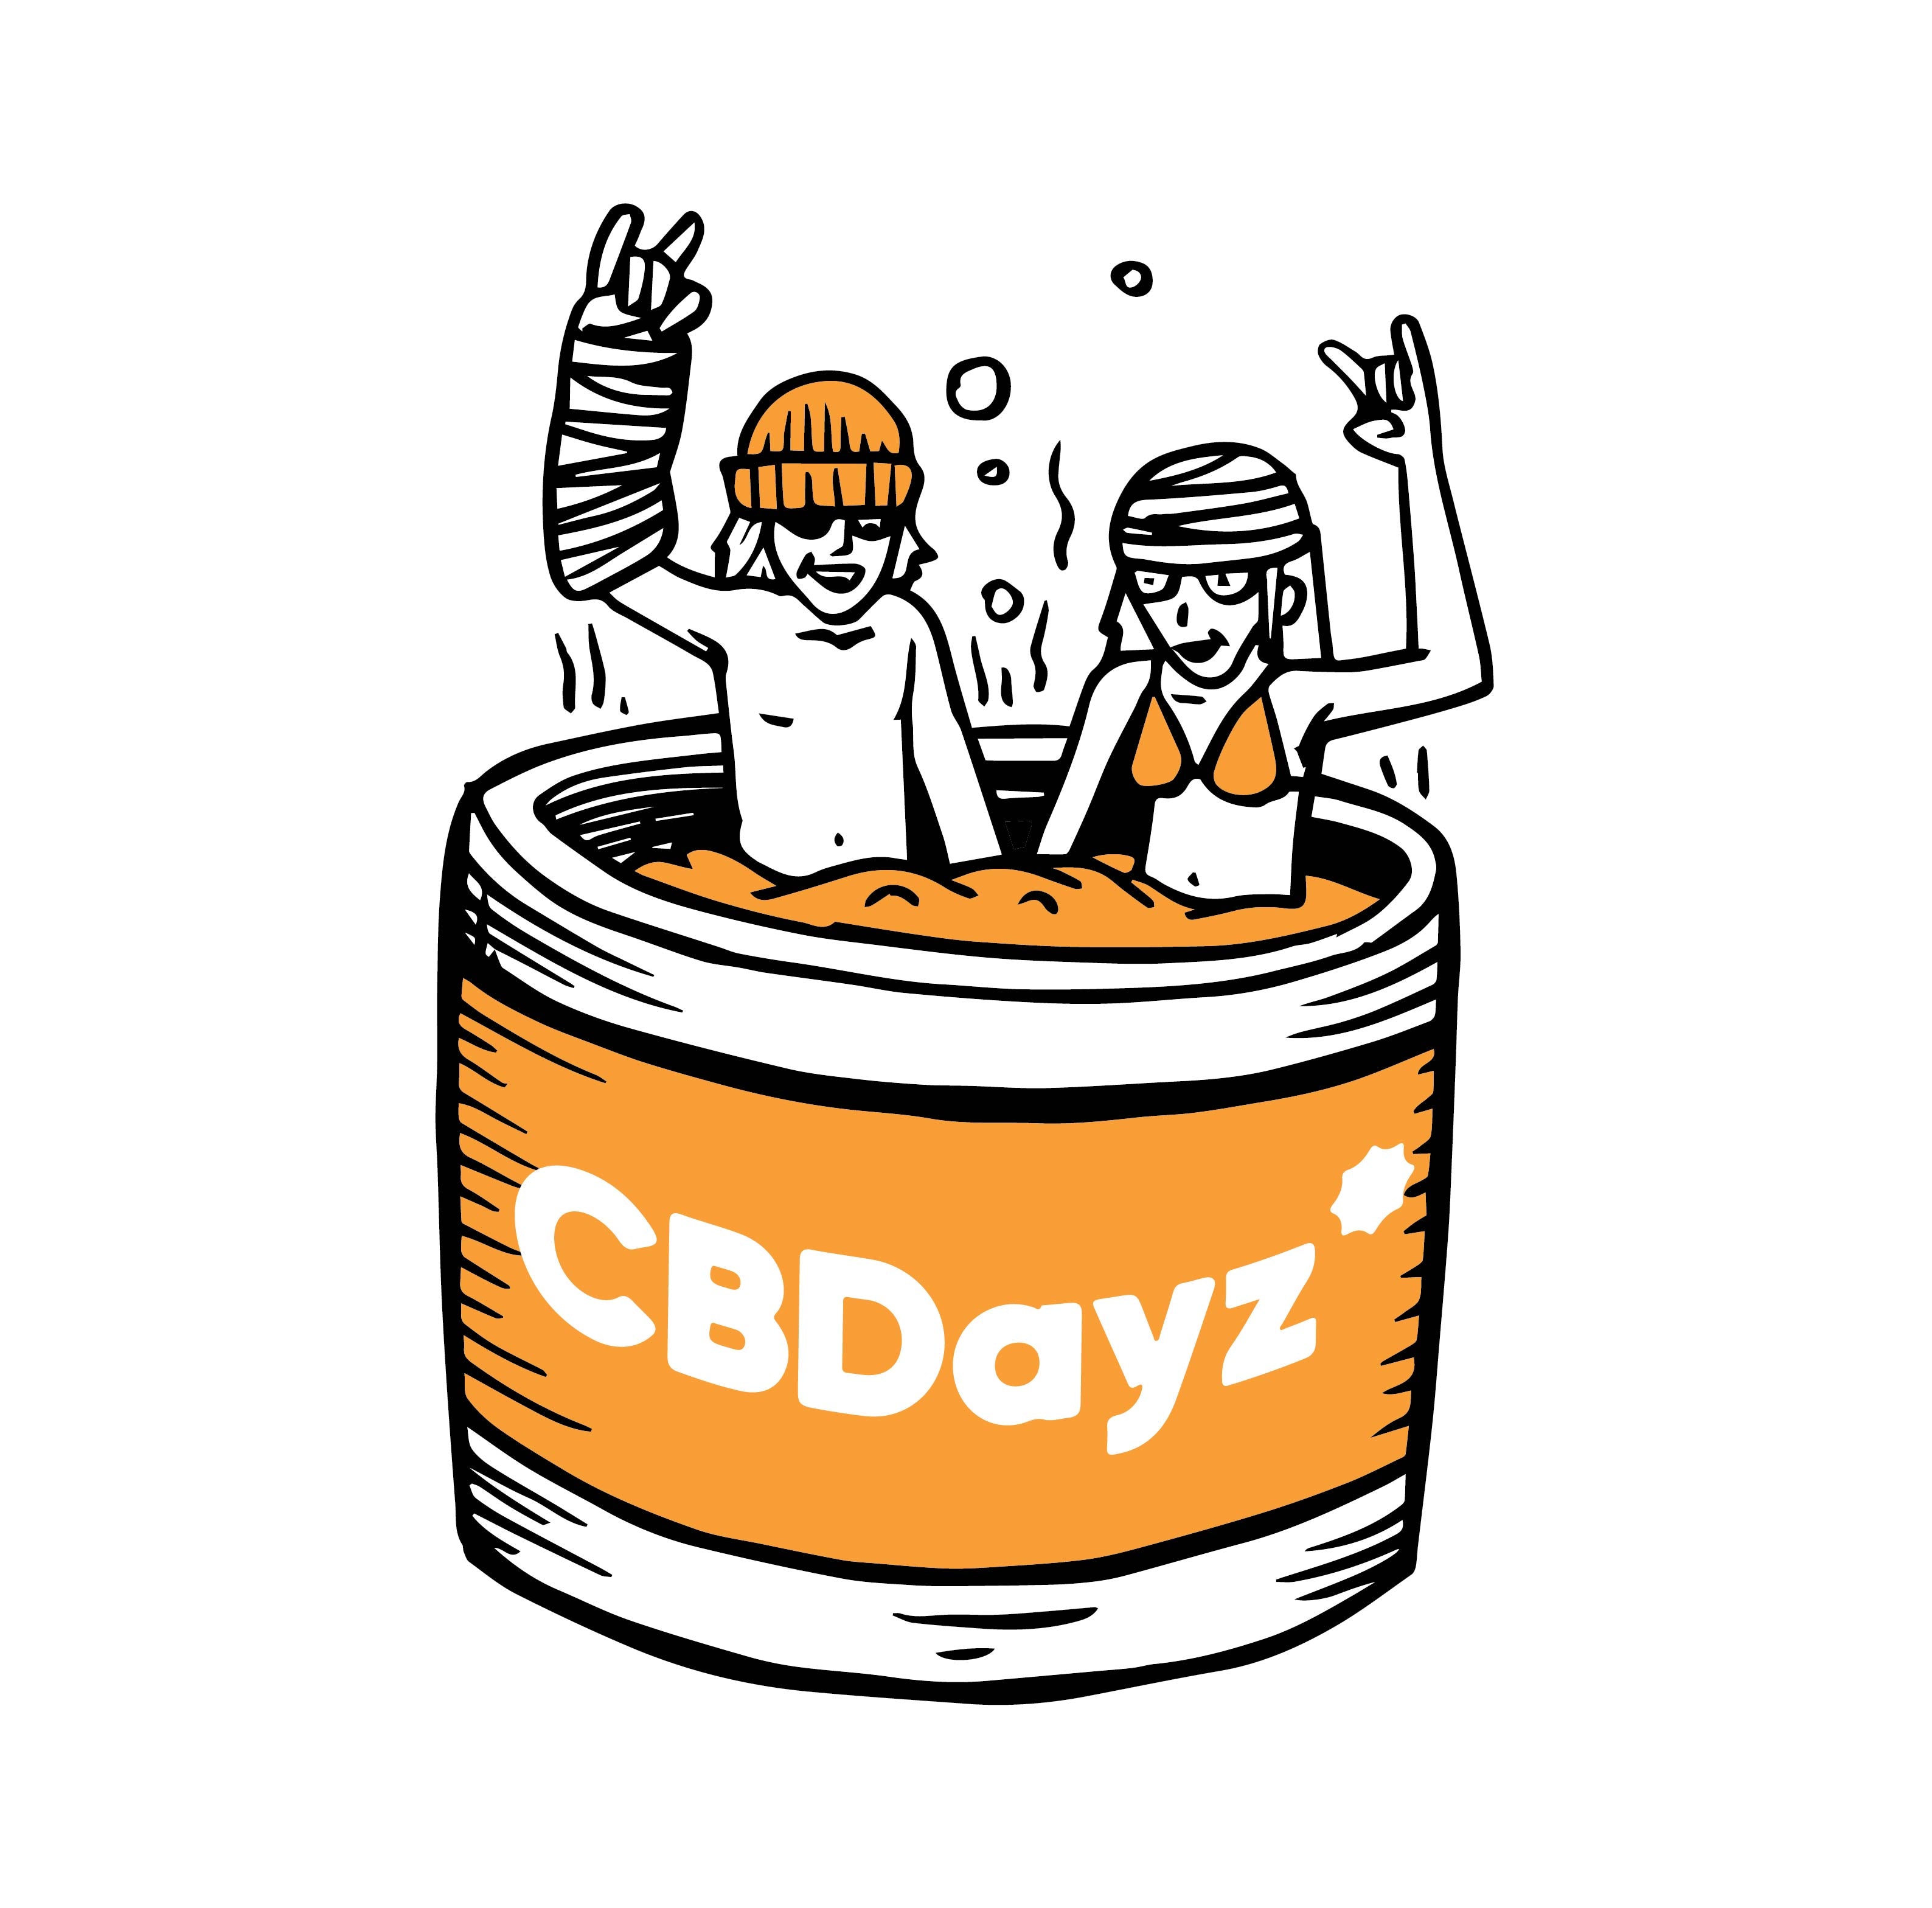 WHAT MAKES OUR CBDAYZ OG MUSCLE GEL SO EFFECTIVE?